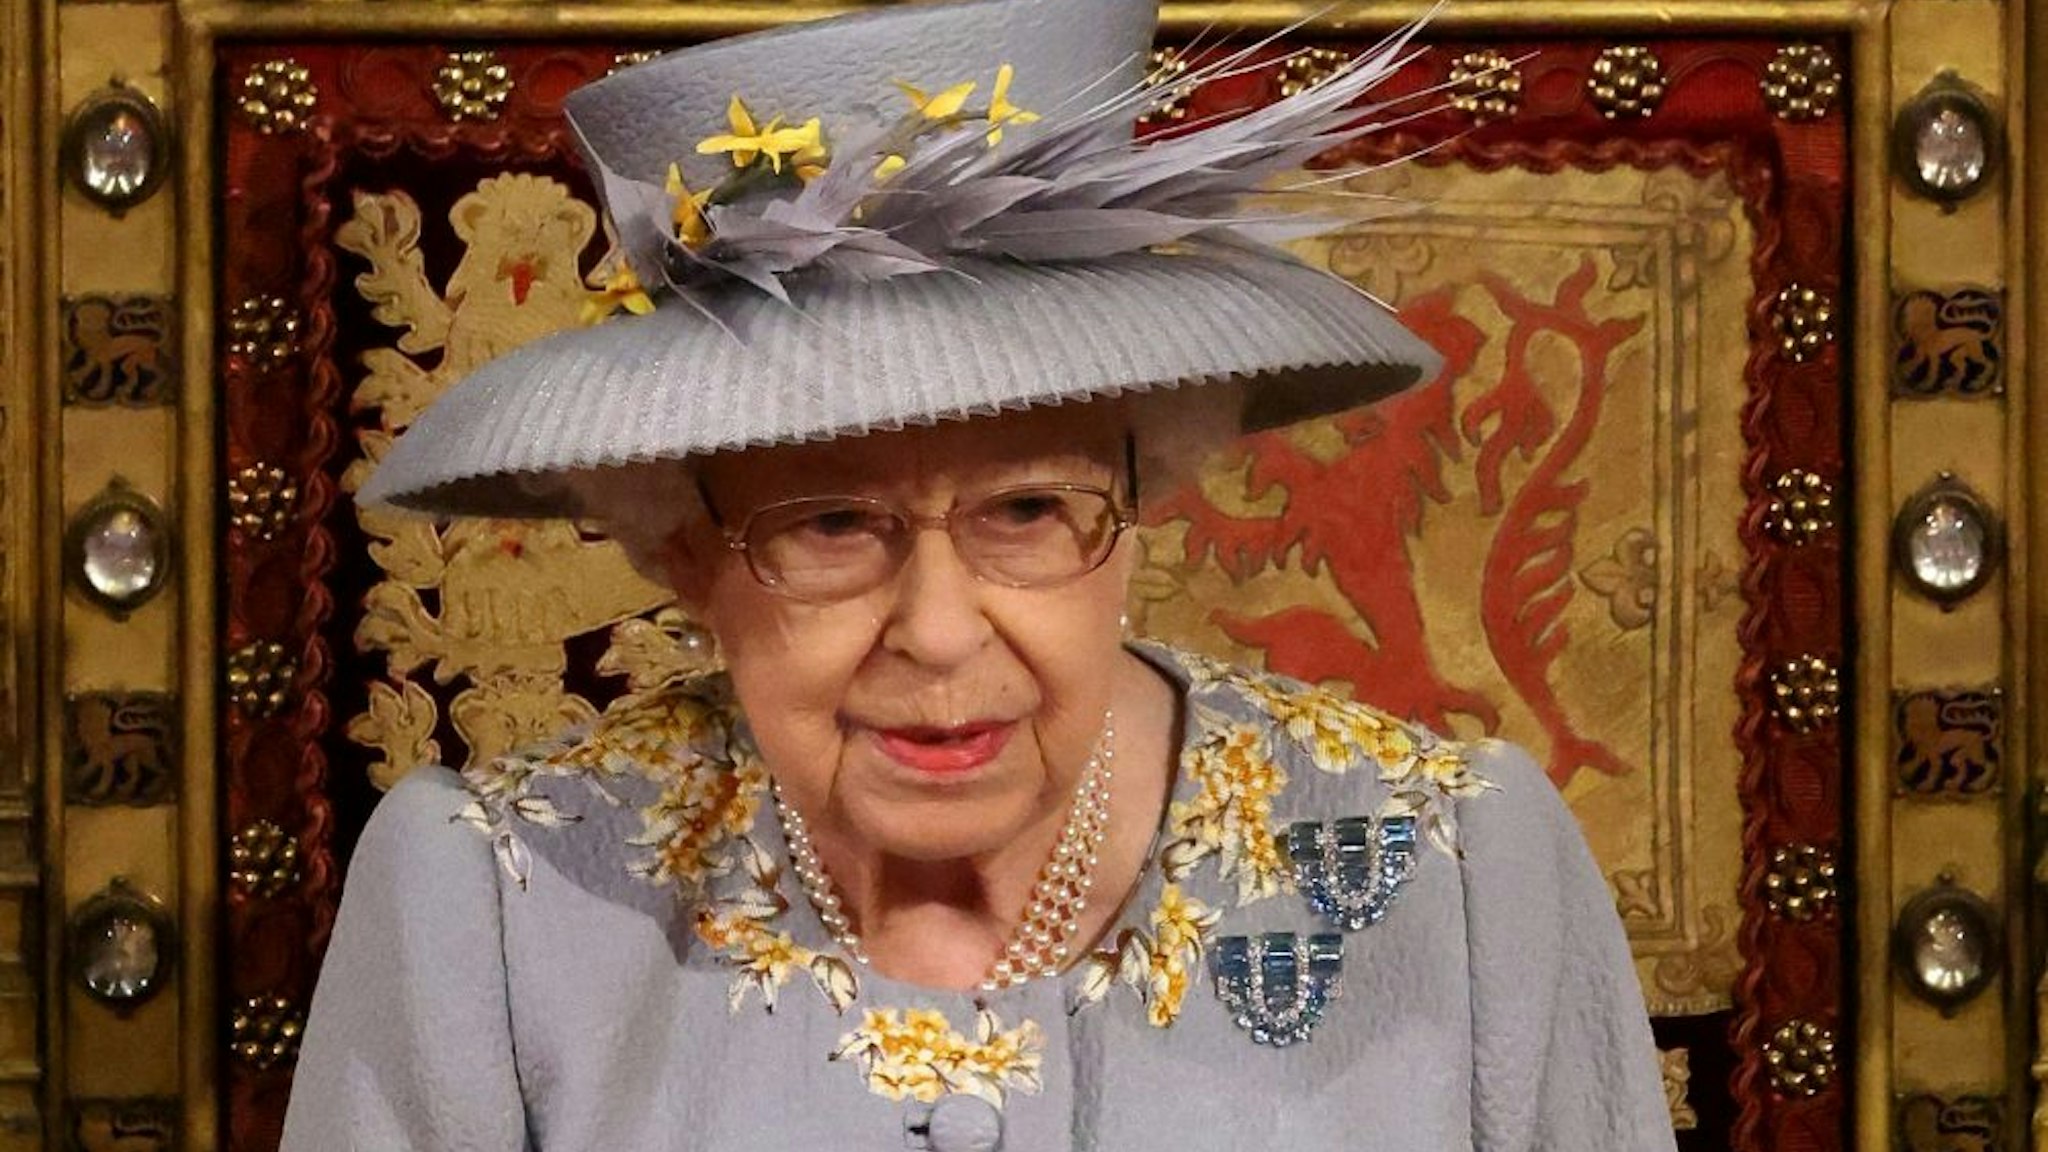 Britain's Queen Elizabeth II waits to read the Queen's Speech on the The Sovereign's Throne in the House of Lords chamber,, during the State Opening of Parliament at the Houses of Parliament in London on May 11, 2021, which is taking place with a reduced capacity due to Covid-19 restrictions. - The State Opening of Parliament is where Queen Elizabeth II performs her ceremonial duty of informing parliament about the government's agenda for the coming year in a Queen's Speech.